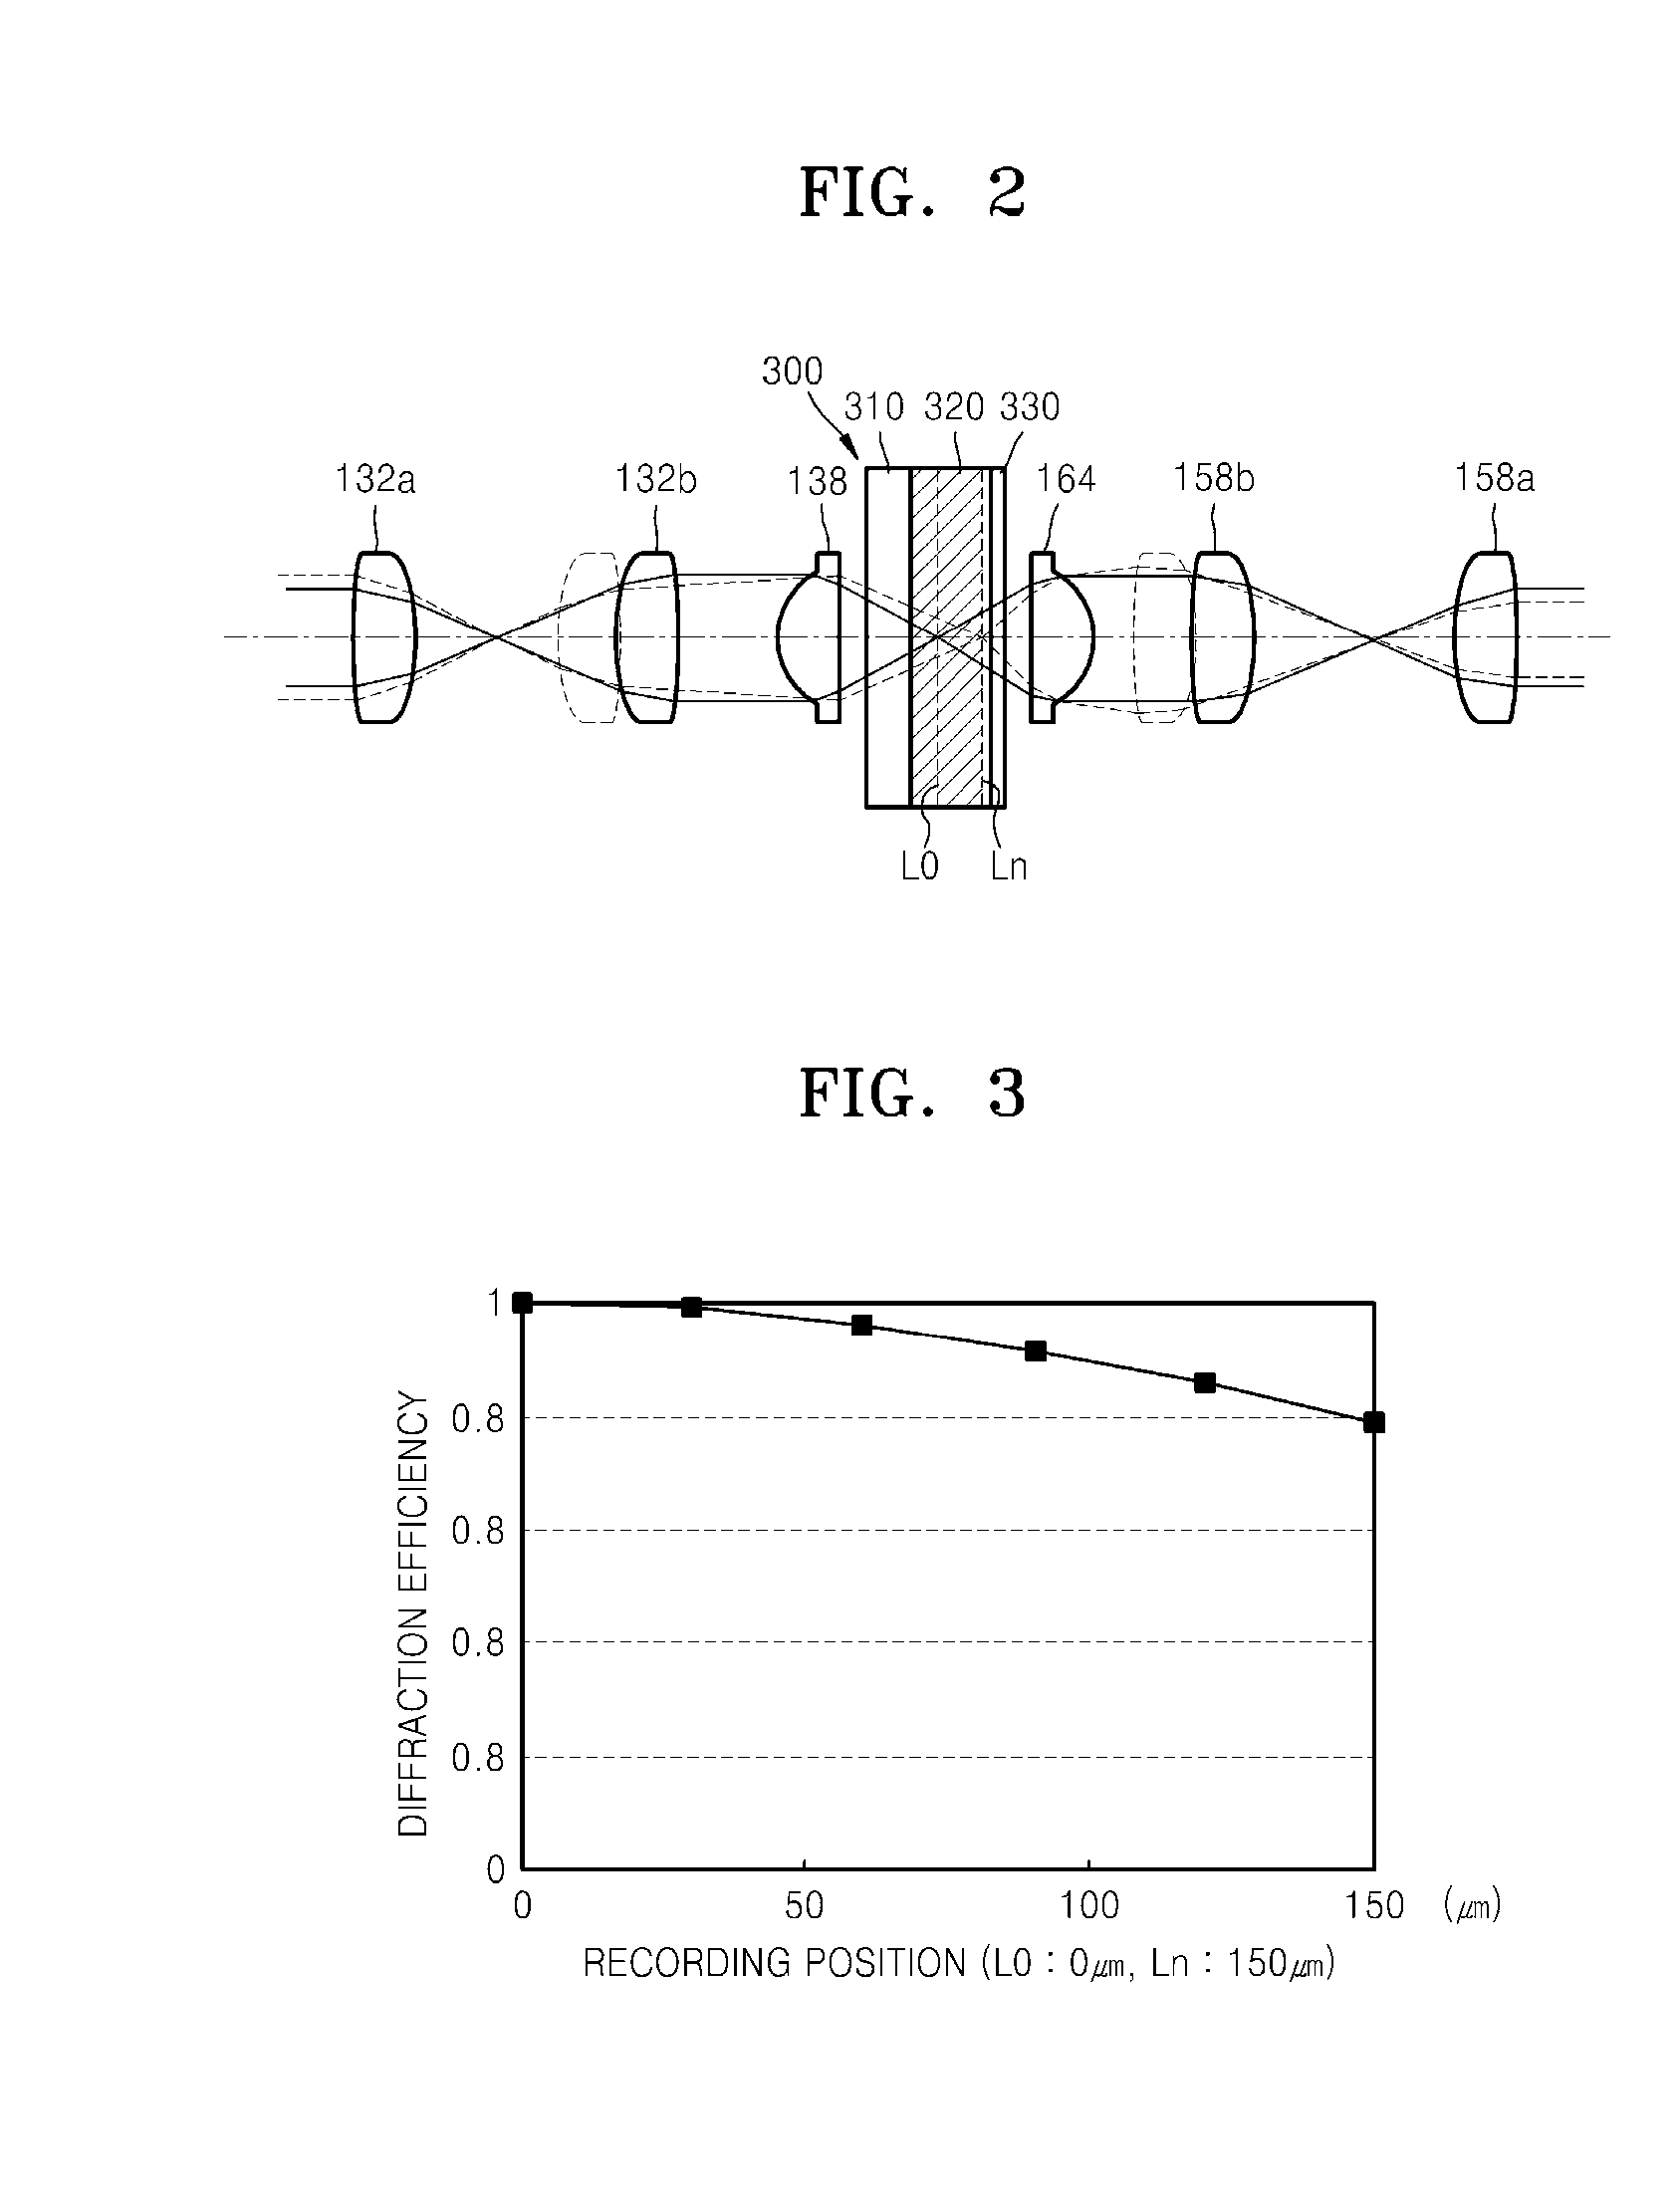 Holographic information recording and/or reproducing apparatus